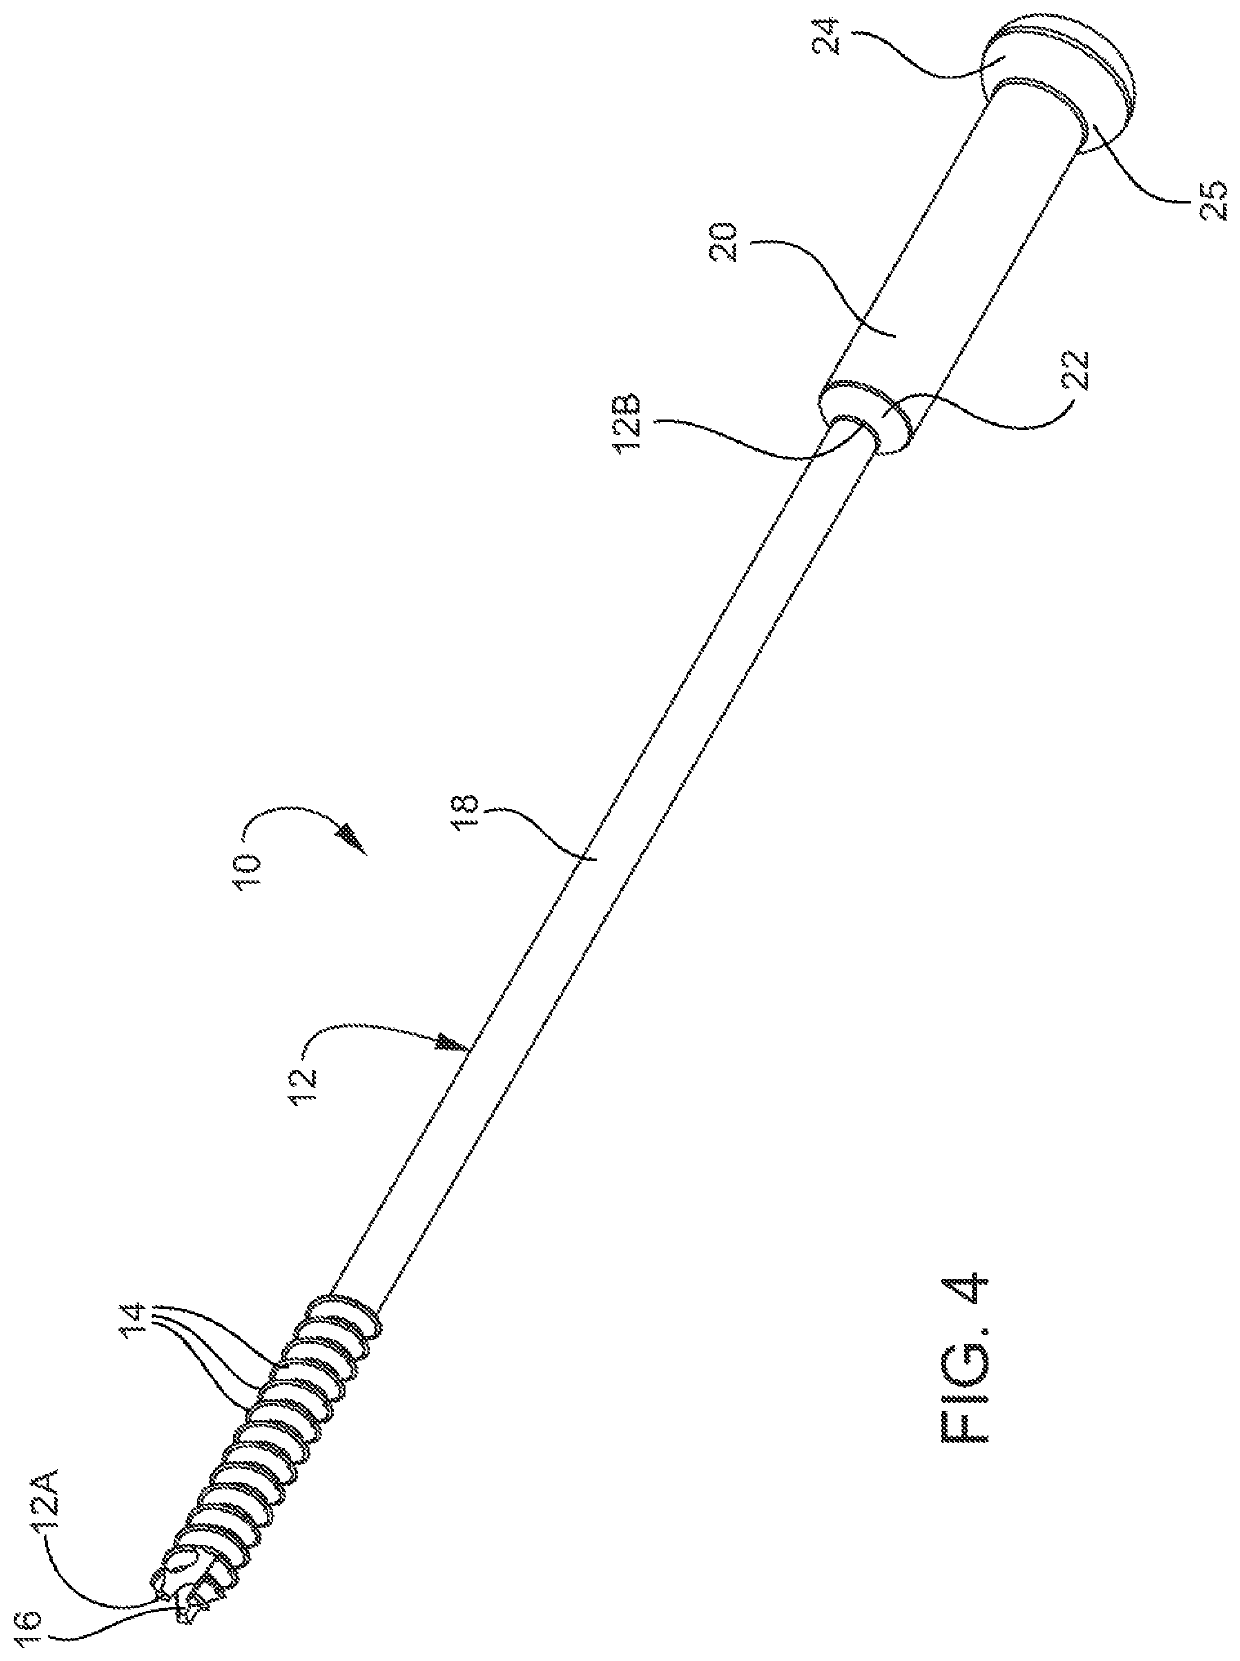 Cannulated orthopedic screw and method of reducing a fracture of the lateral malleolus